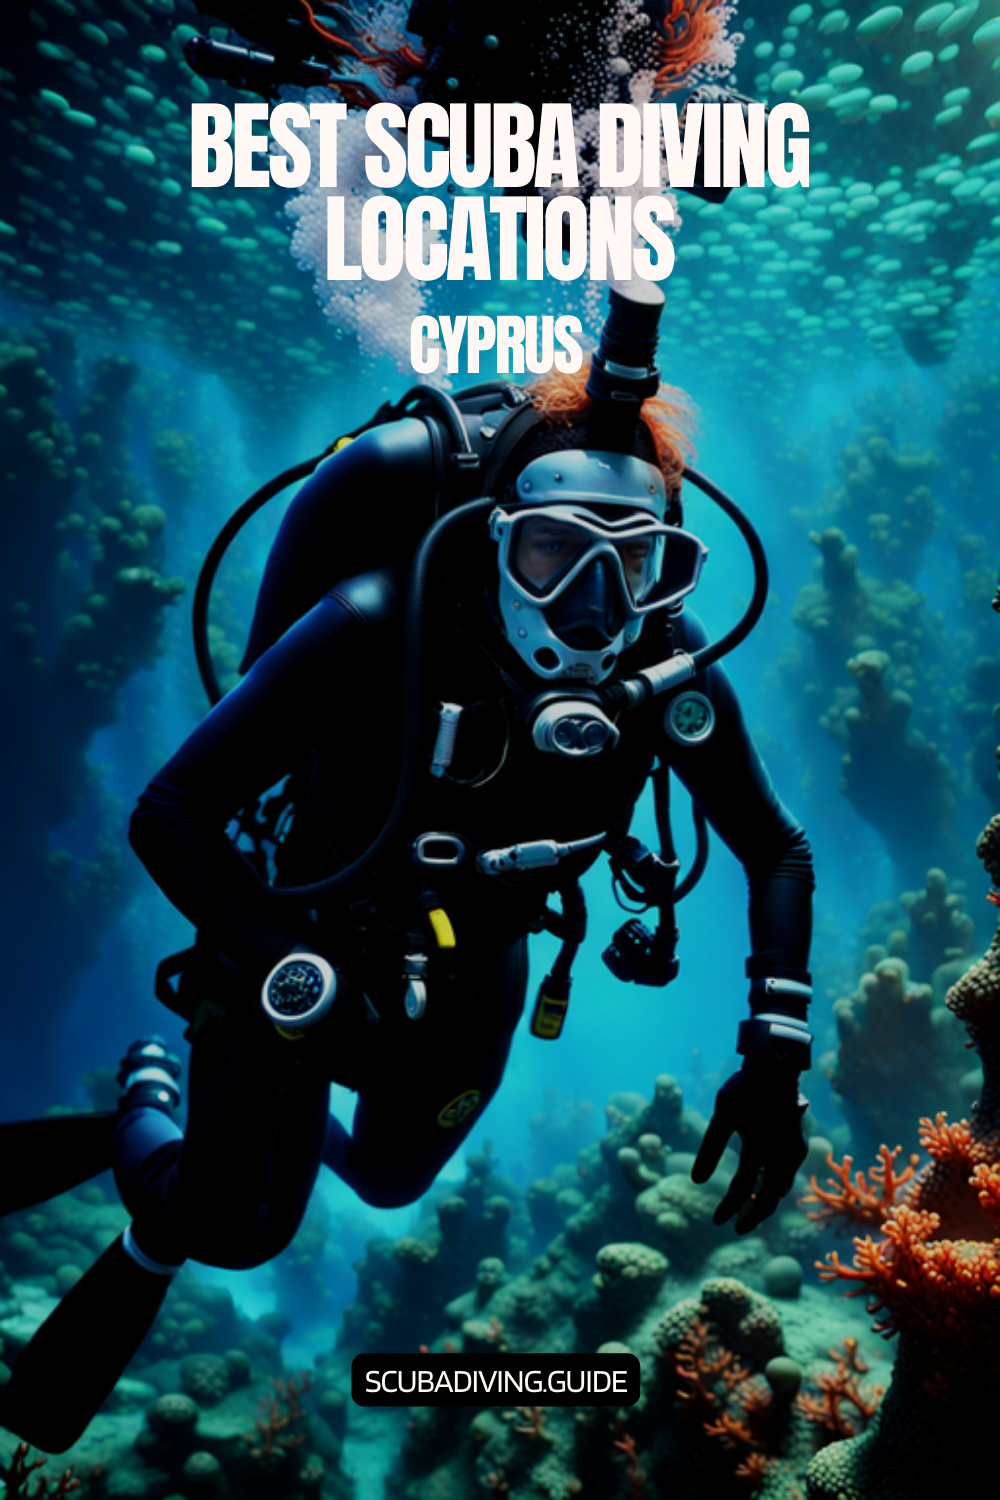 Scuba Diving Locations in Cyprus